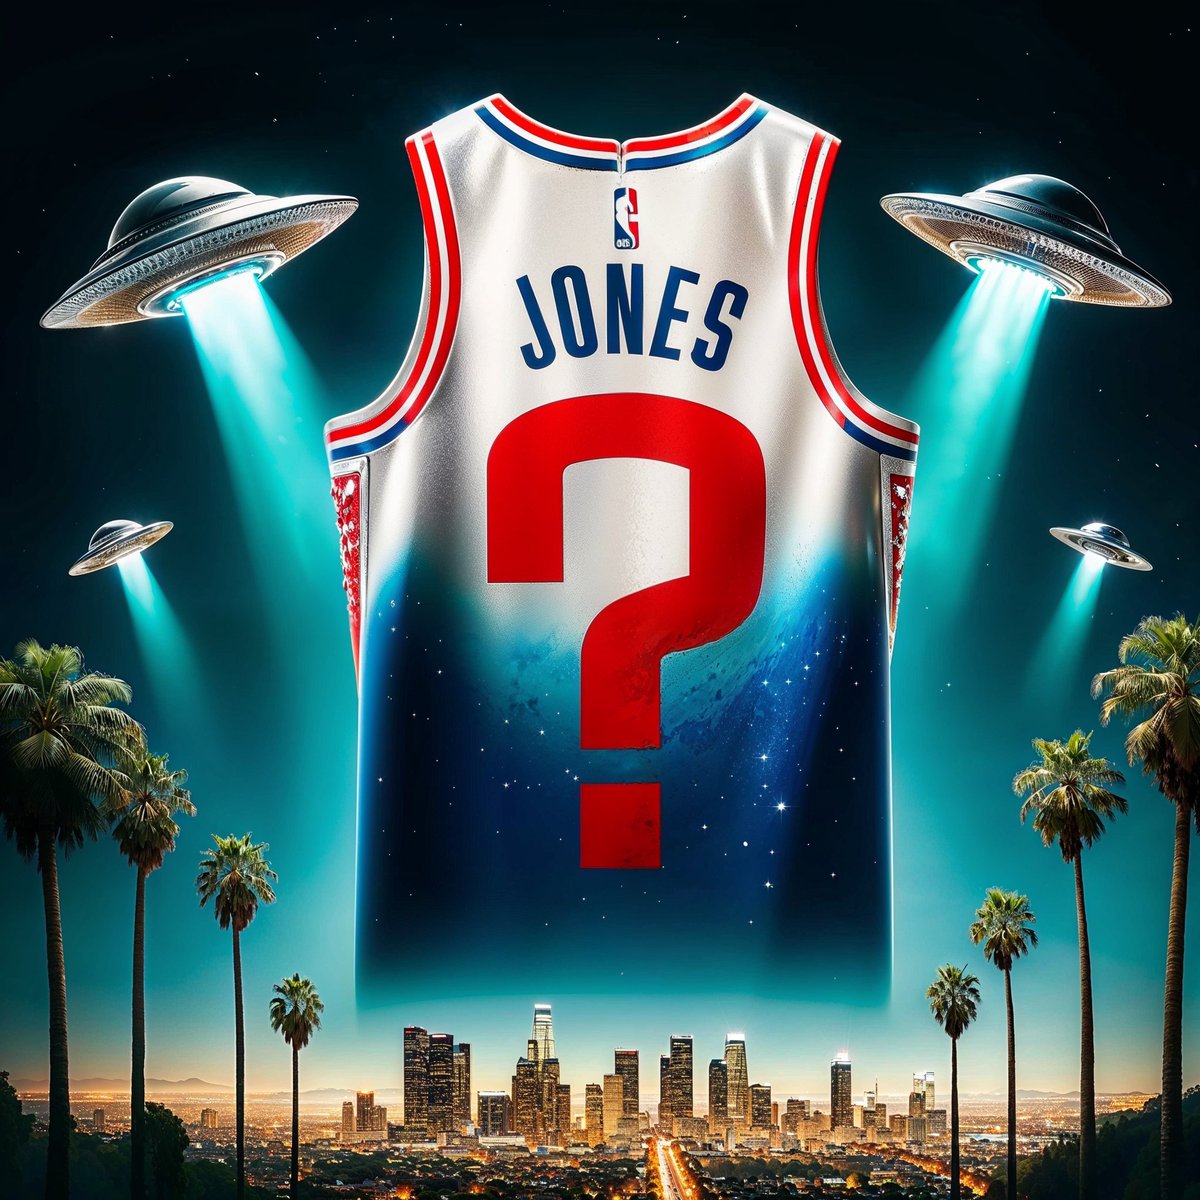 Does anyone know what jersey number Kai Jones will wear with the clippers. ?